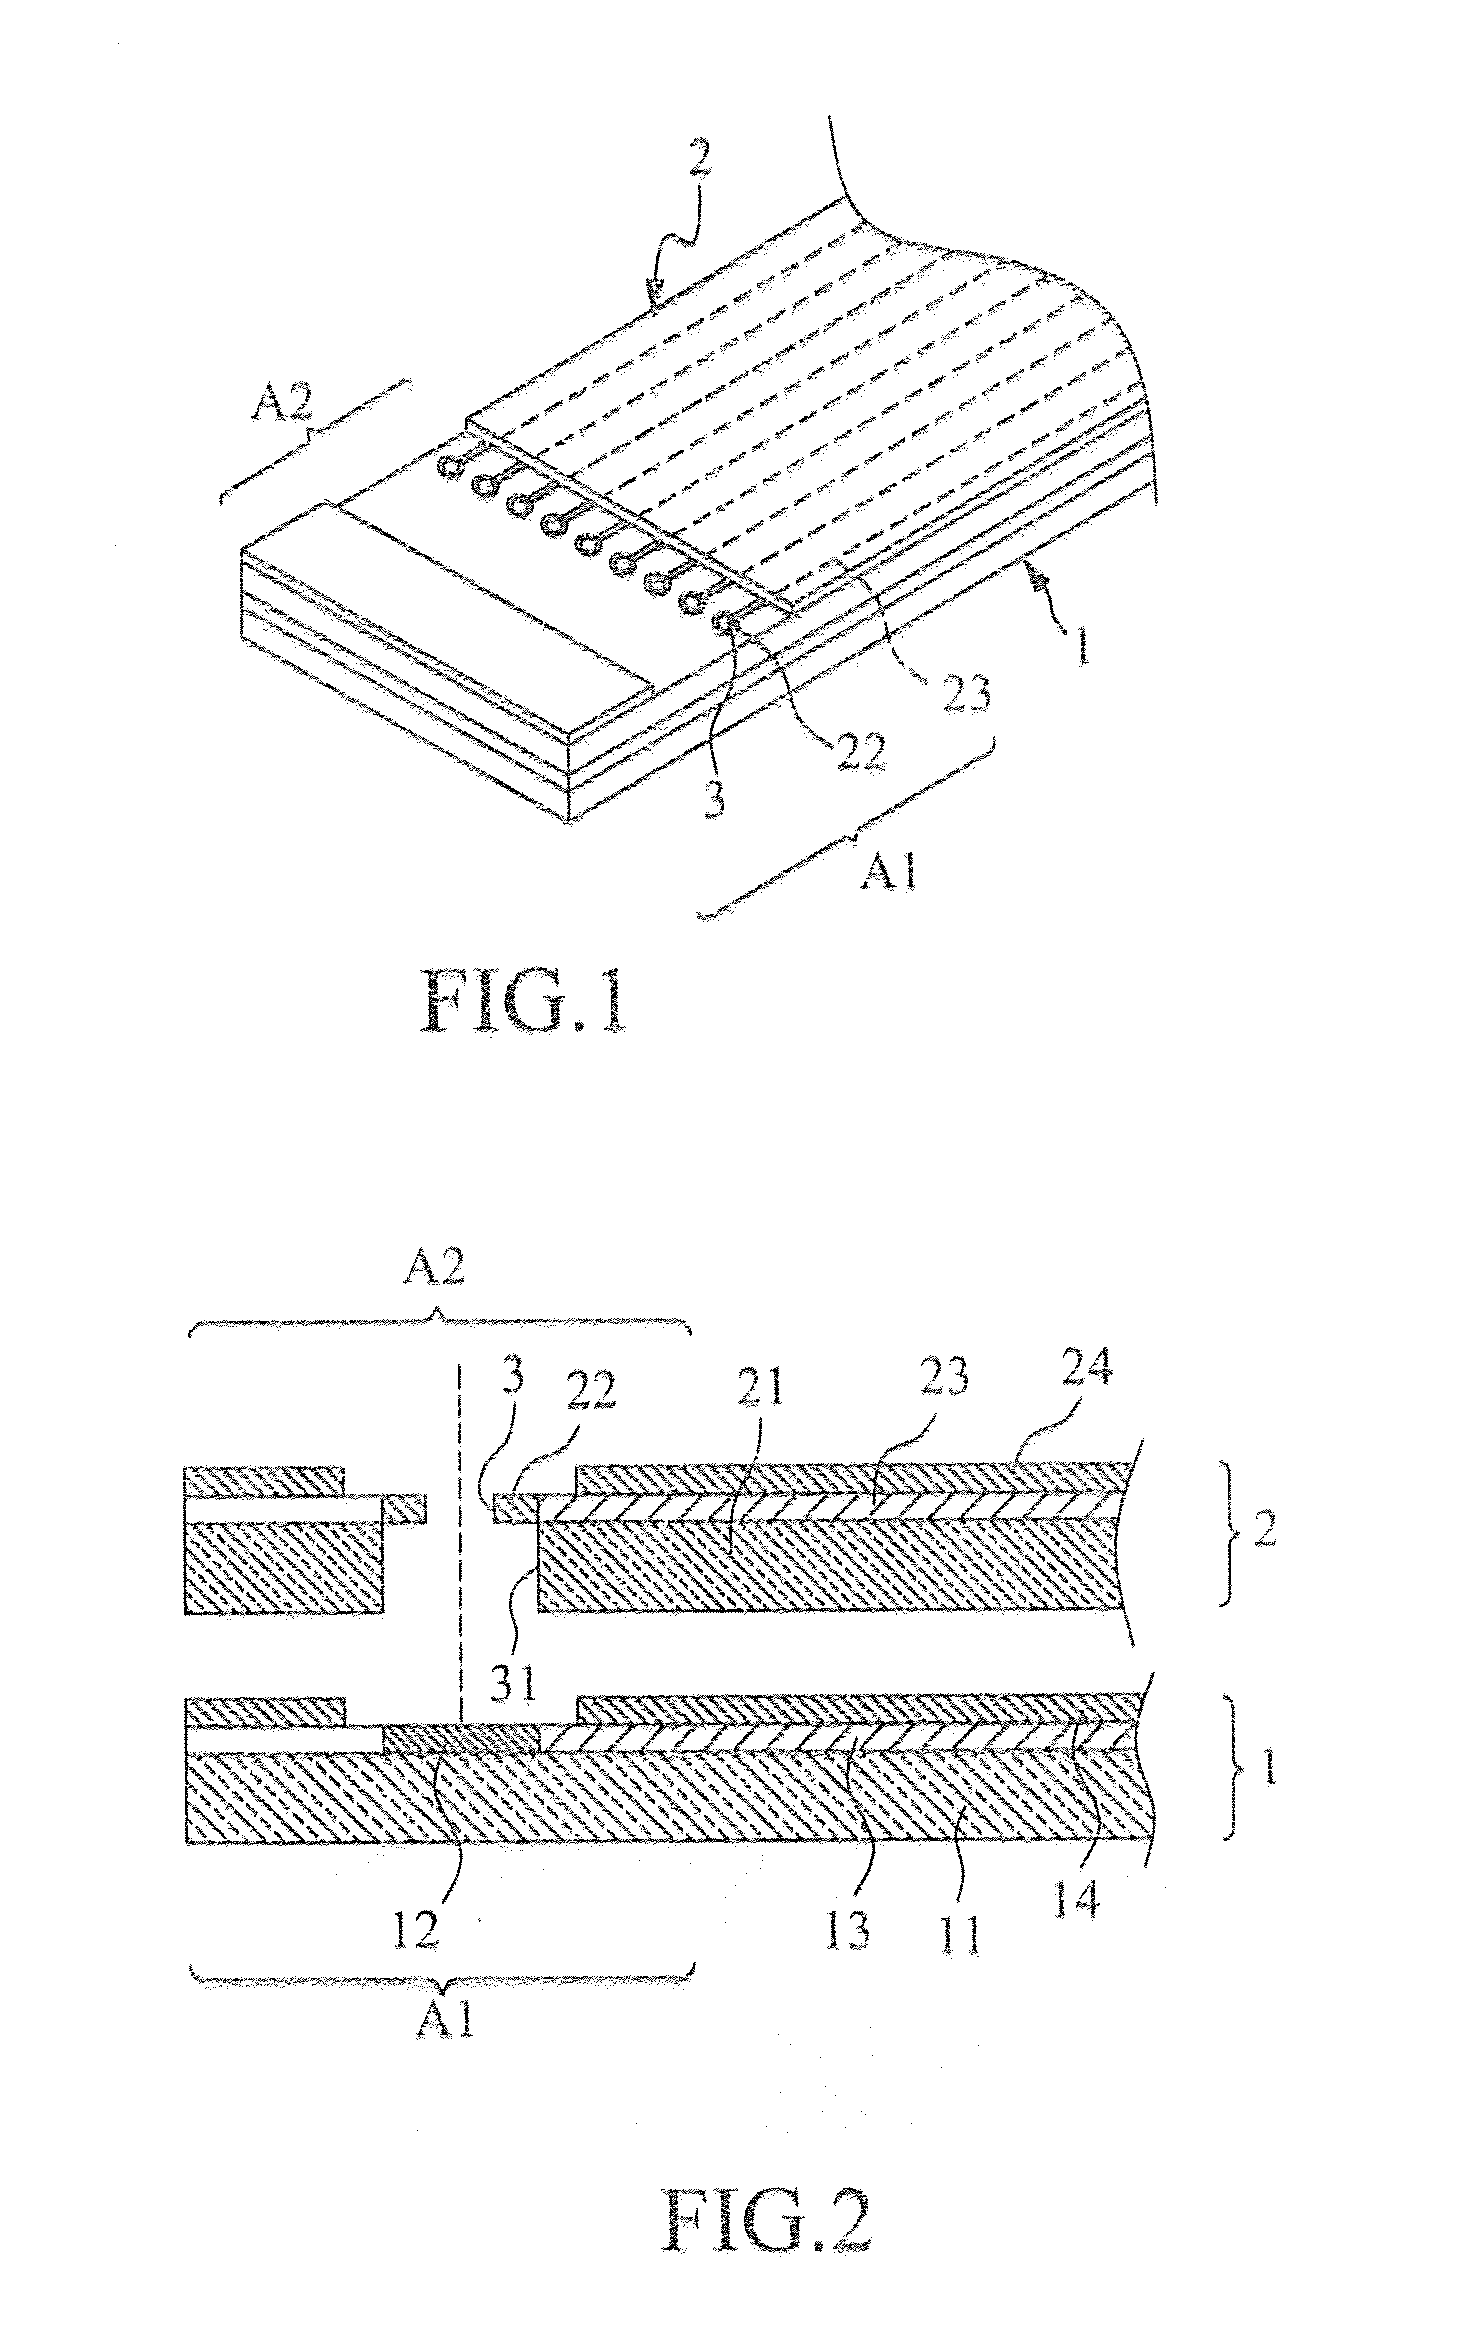 Interconnecting conduction structure for electrically connecting conductive traces of flexible circuit boards